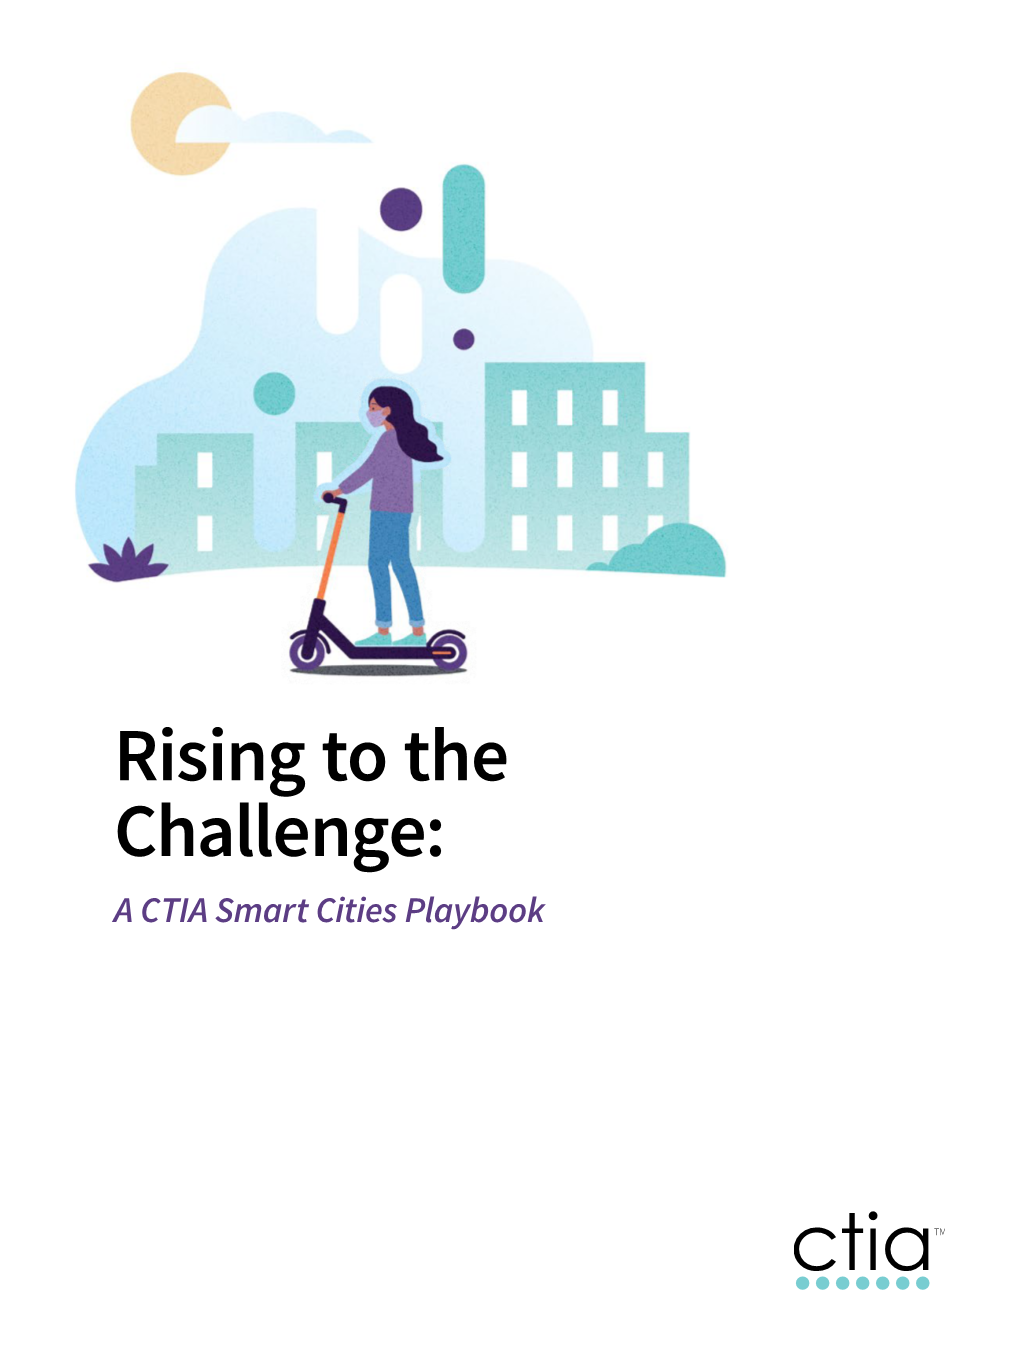 Rising to the Challenge: a Smart Cities Playbook”